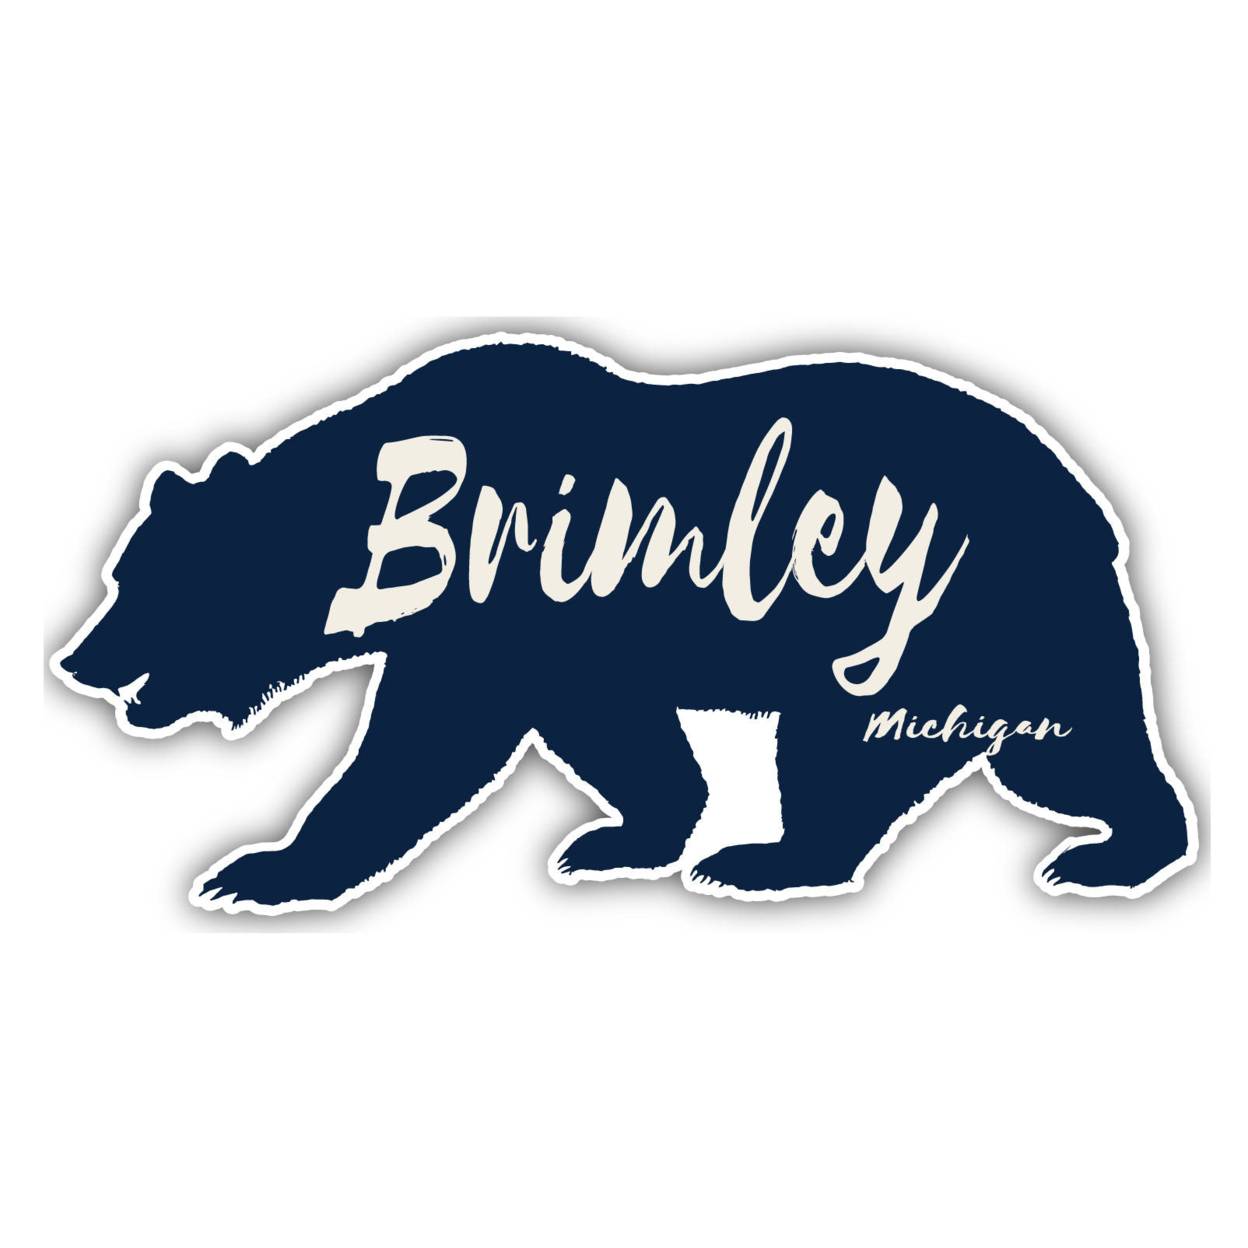 Brimley Michigan Souvenir Decorative Stickers (Choose Theme And Size) - 4-Pack, 12-Inch, Bear